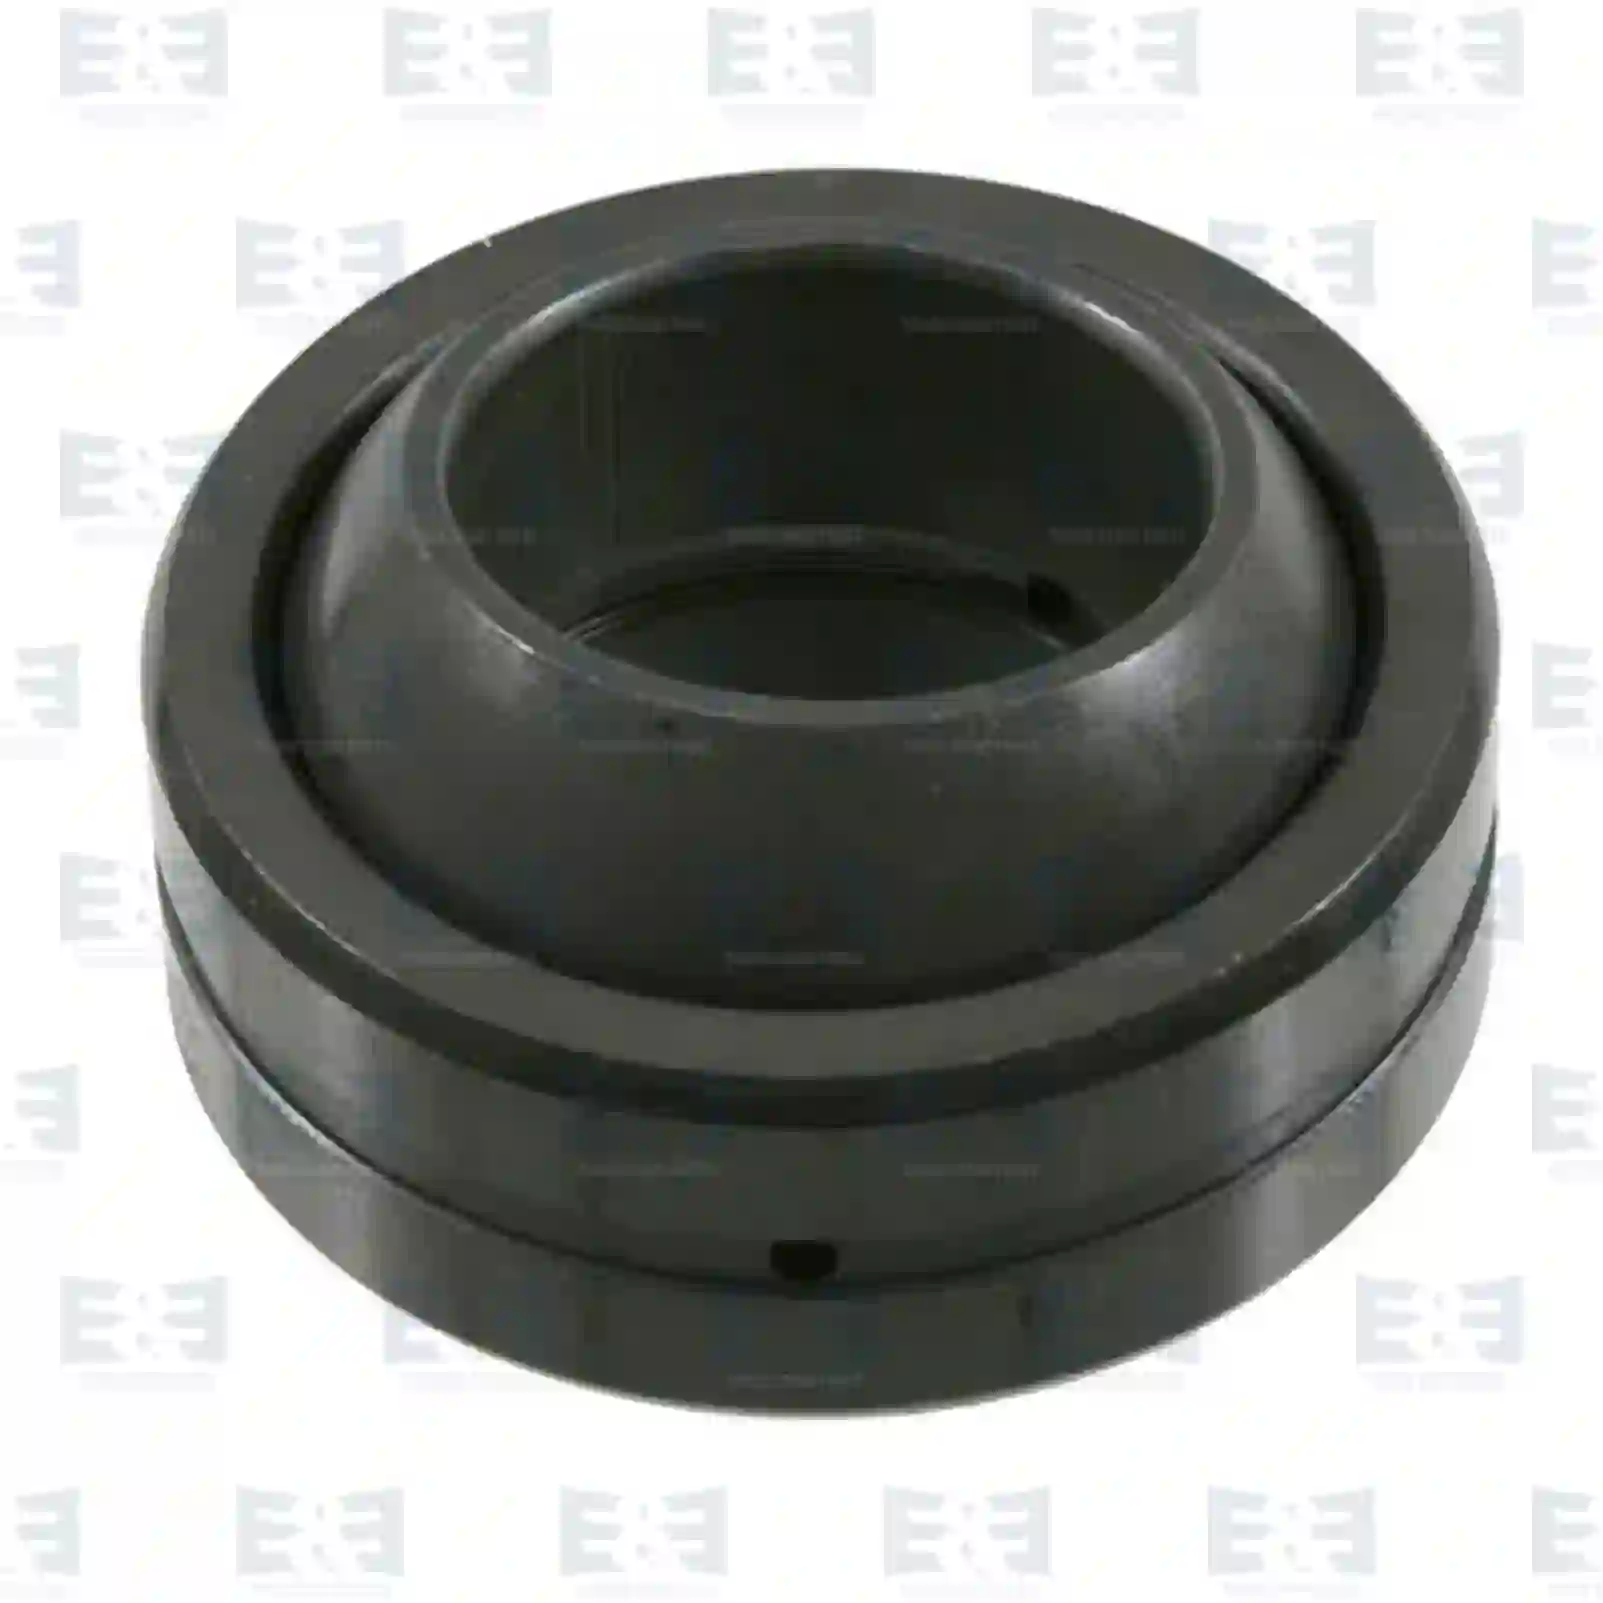  Joint bearing || E&E Truck Spare Parts | Truck Spare Parts, Auotomotive Spare Parts